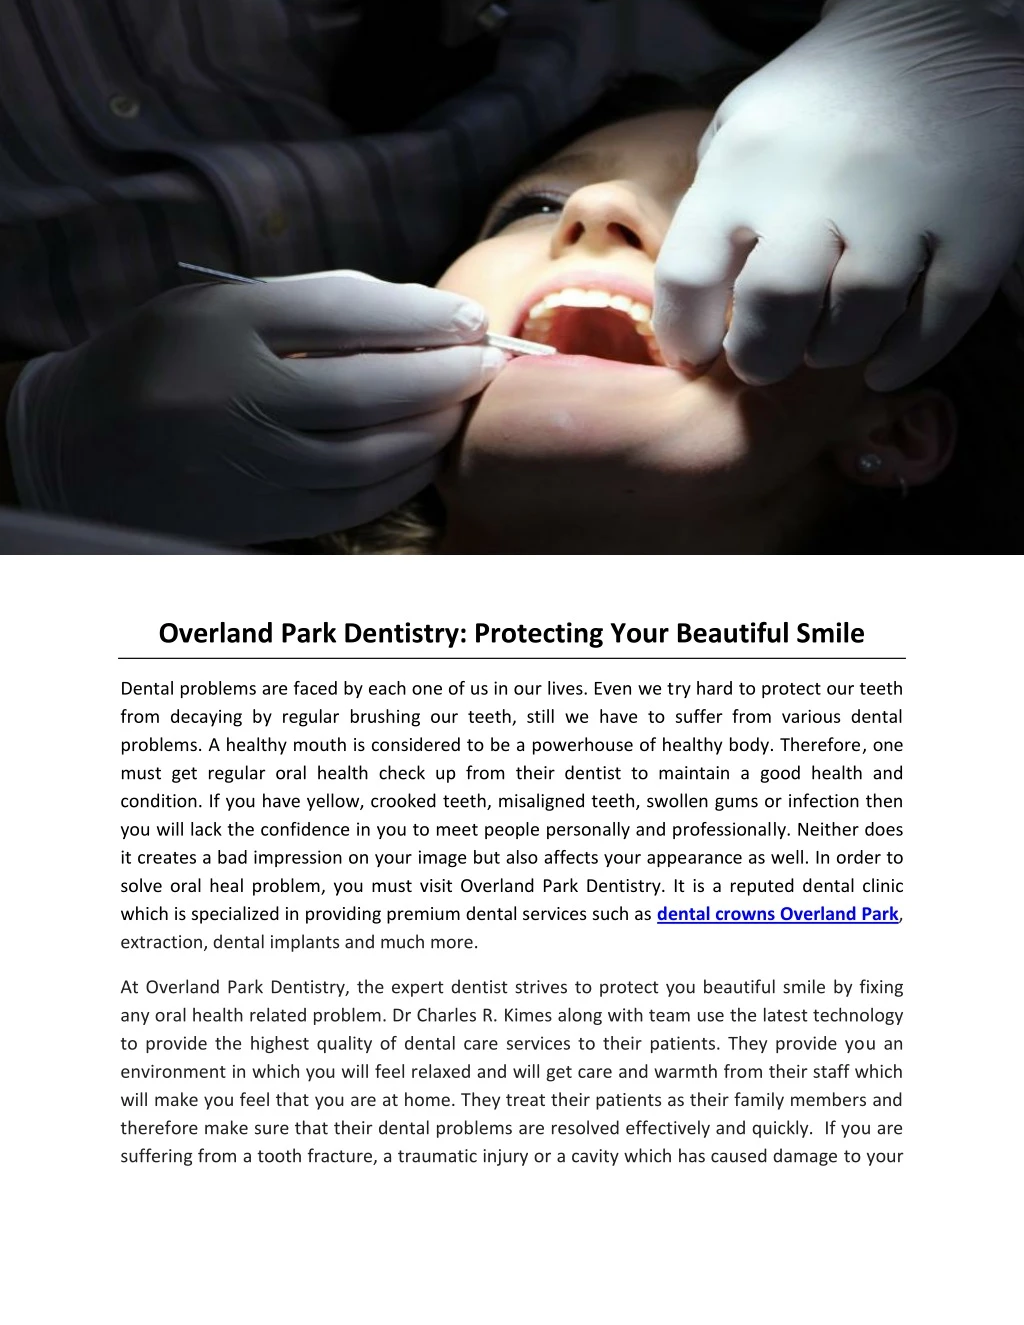 overland park dentistry protecting your beautiful